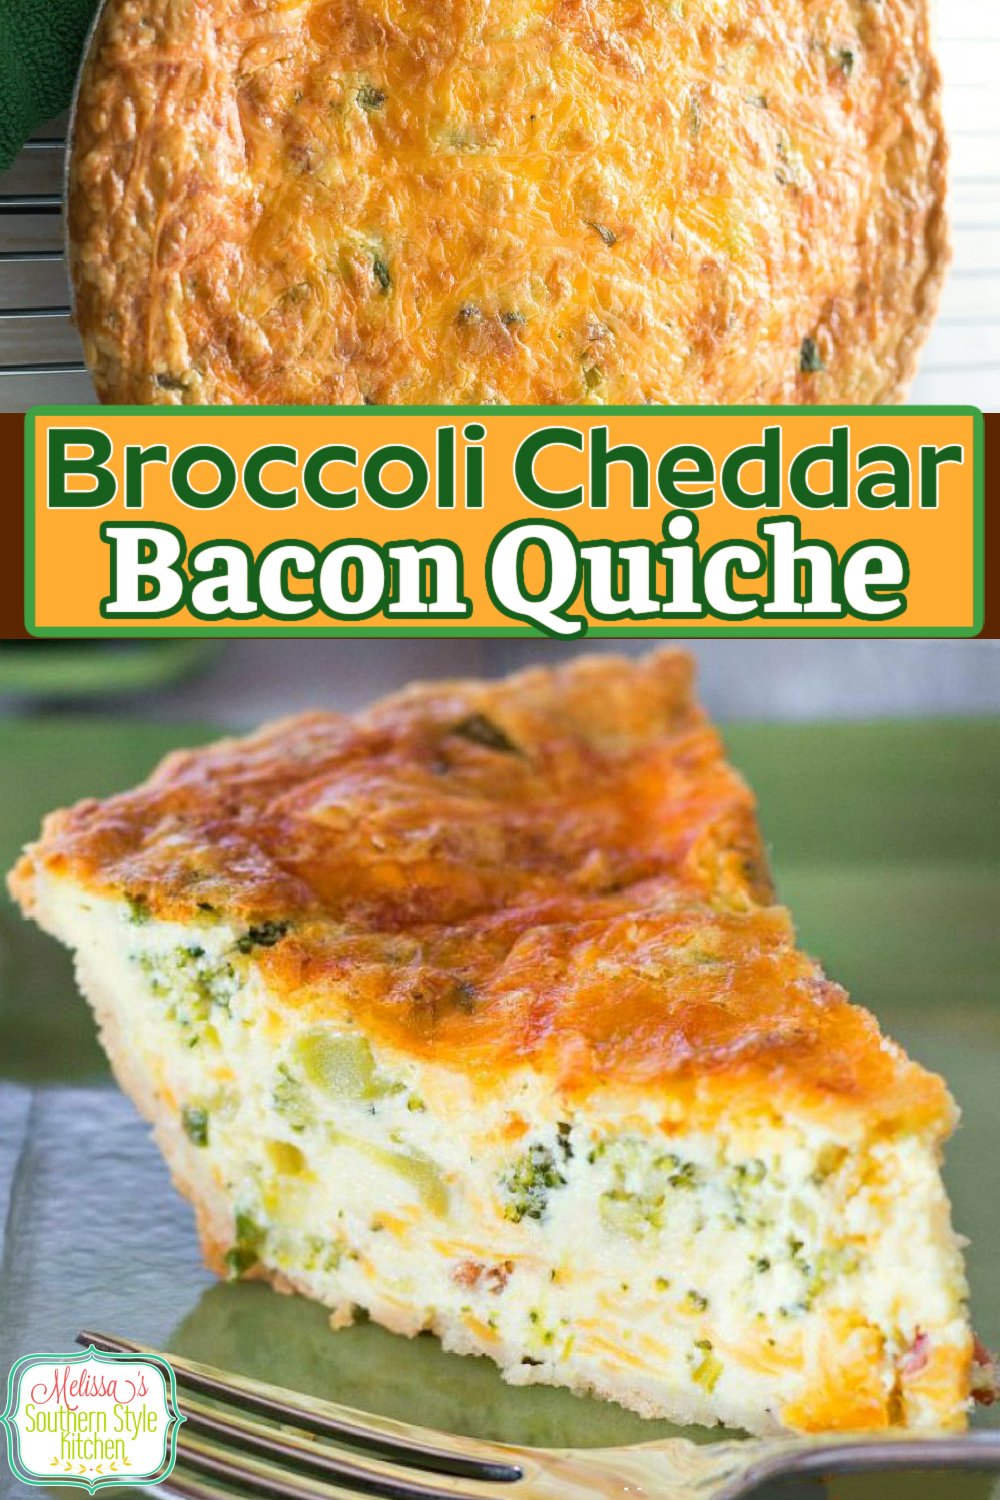 Enjoy a big piece of this Broccoli Cheddar Bacon Quiche at any meal of the day #cheddarbroccolibaconquiche #broccolicheddar #quiche #cheddarquiche #bacon #bestquicherecipes #brunch #breakfast #dinner #dinnerideas #broccoli #southernrecipes #southernfood via @melissasssk